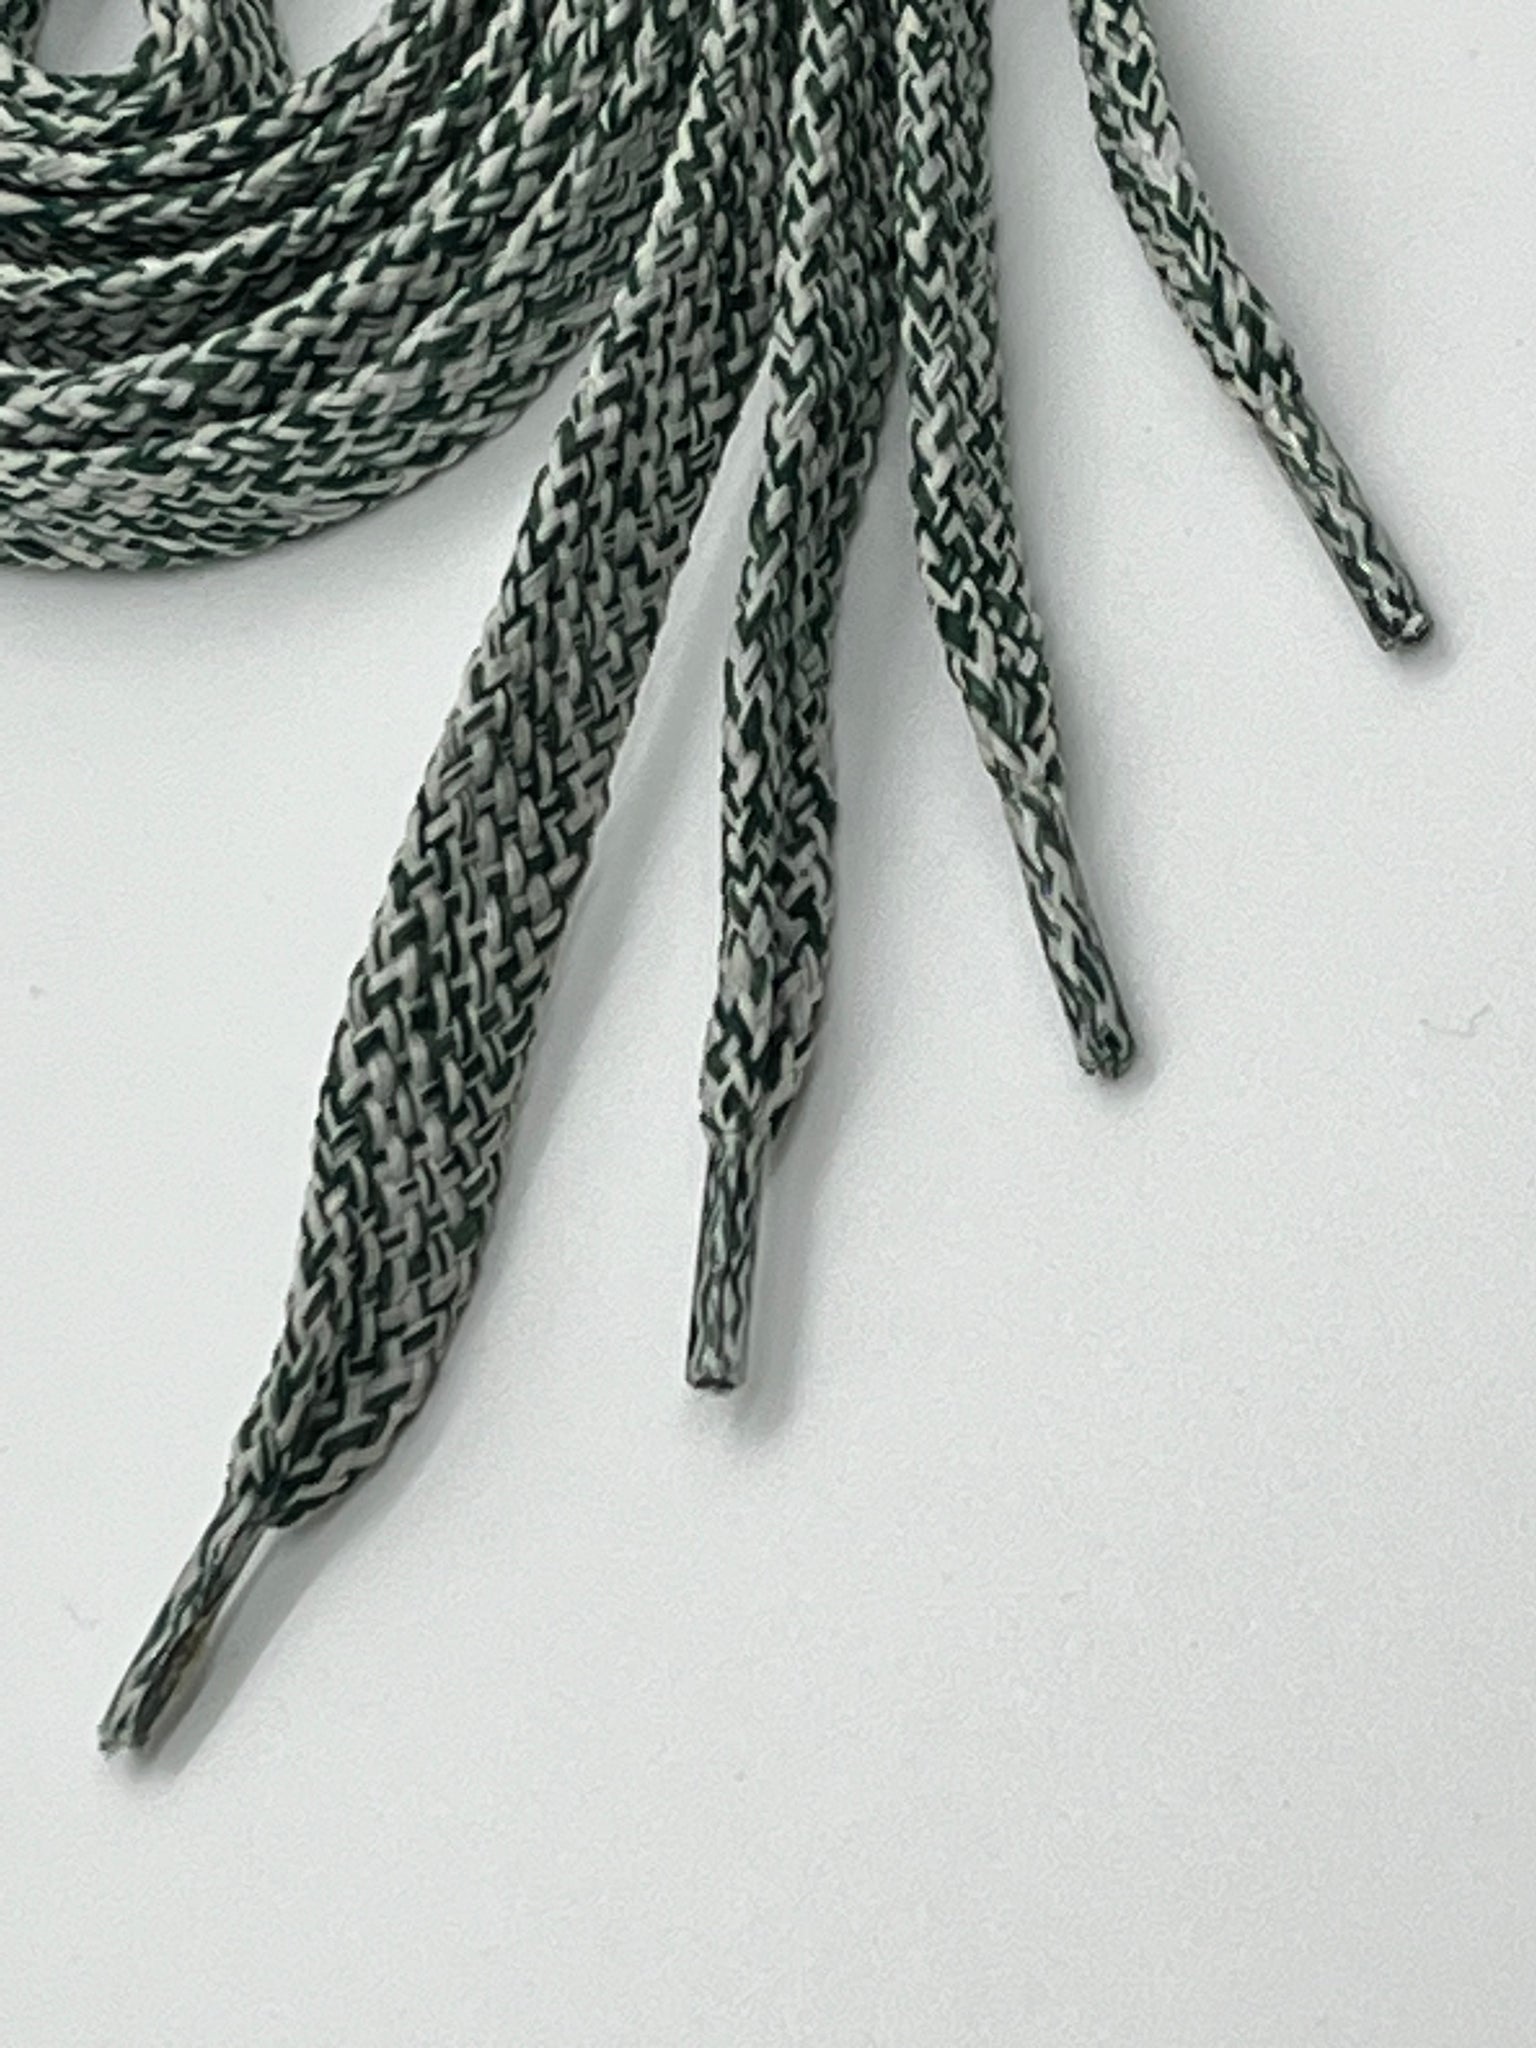 Flat Tweed Shoelaces - Green and White